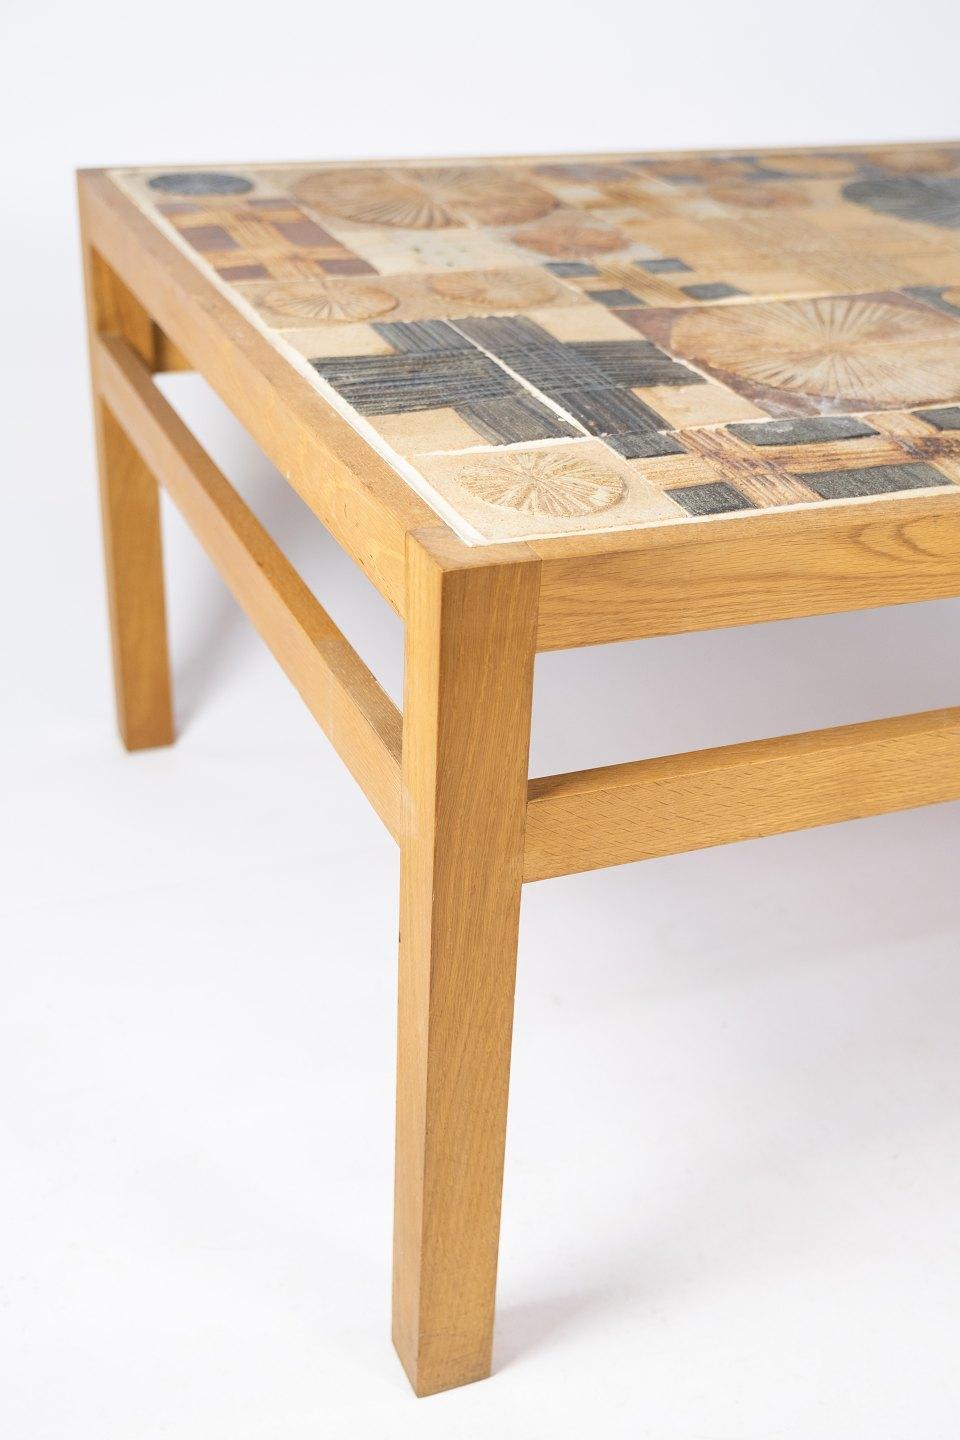 Late 20th Century Coffee Table in Oak and with Different Tiles, Designed by Tue Poulsen, 1970s